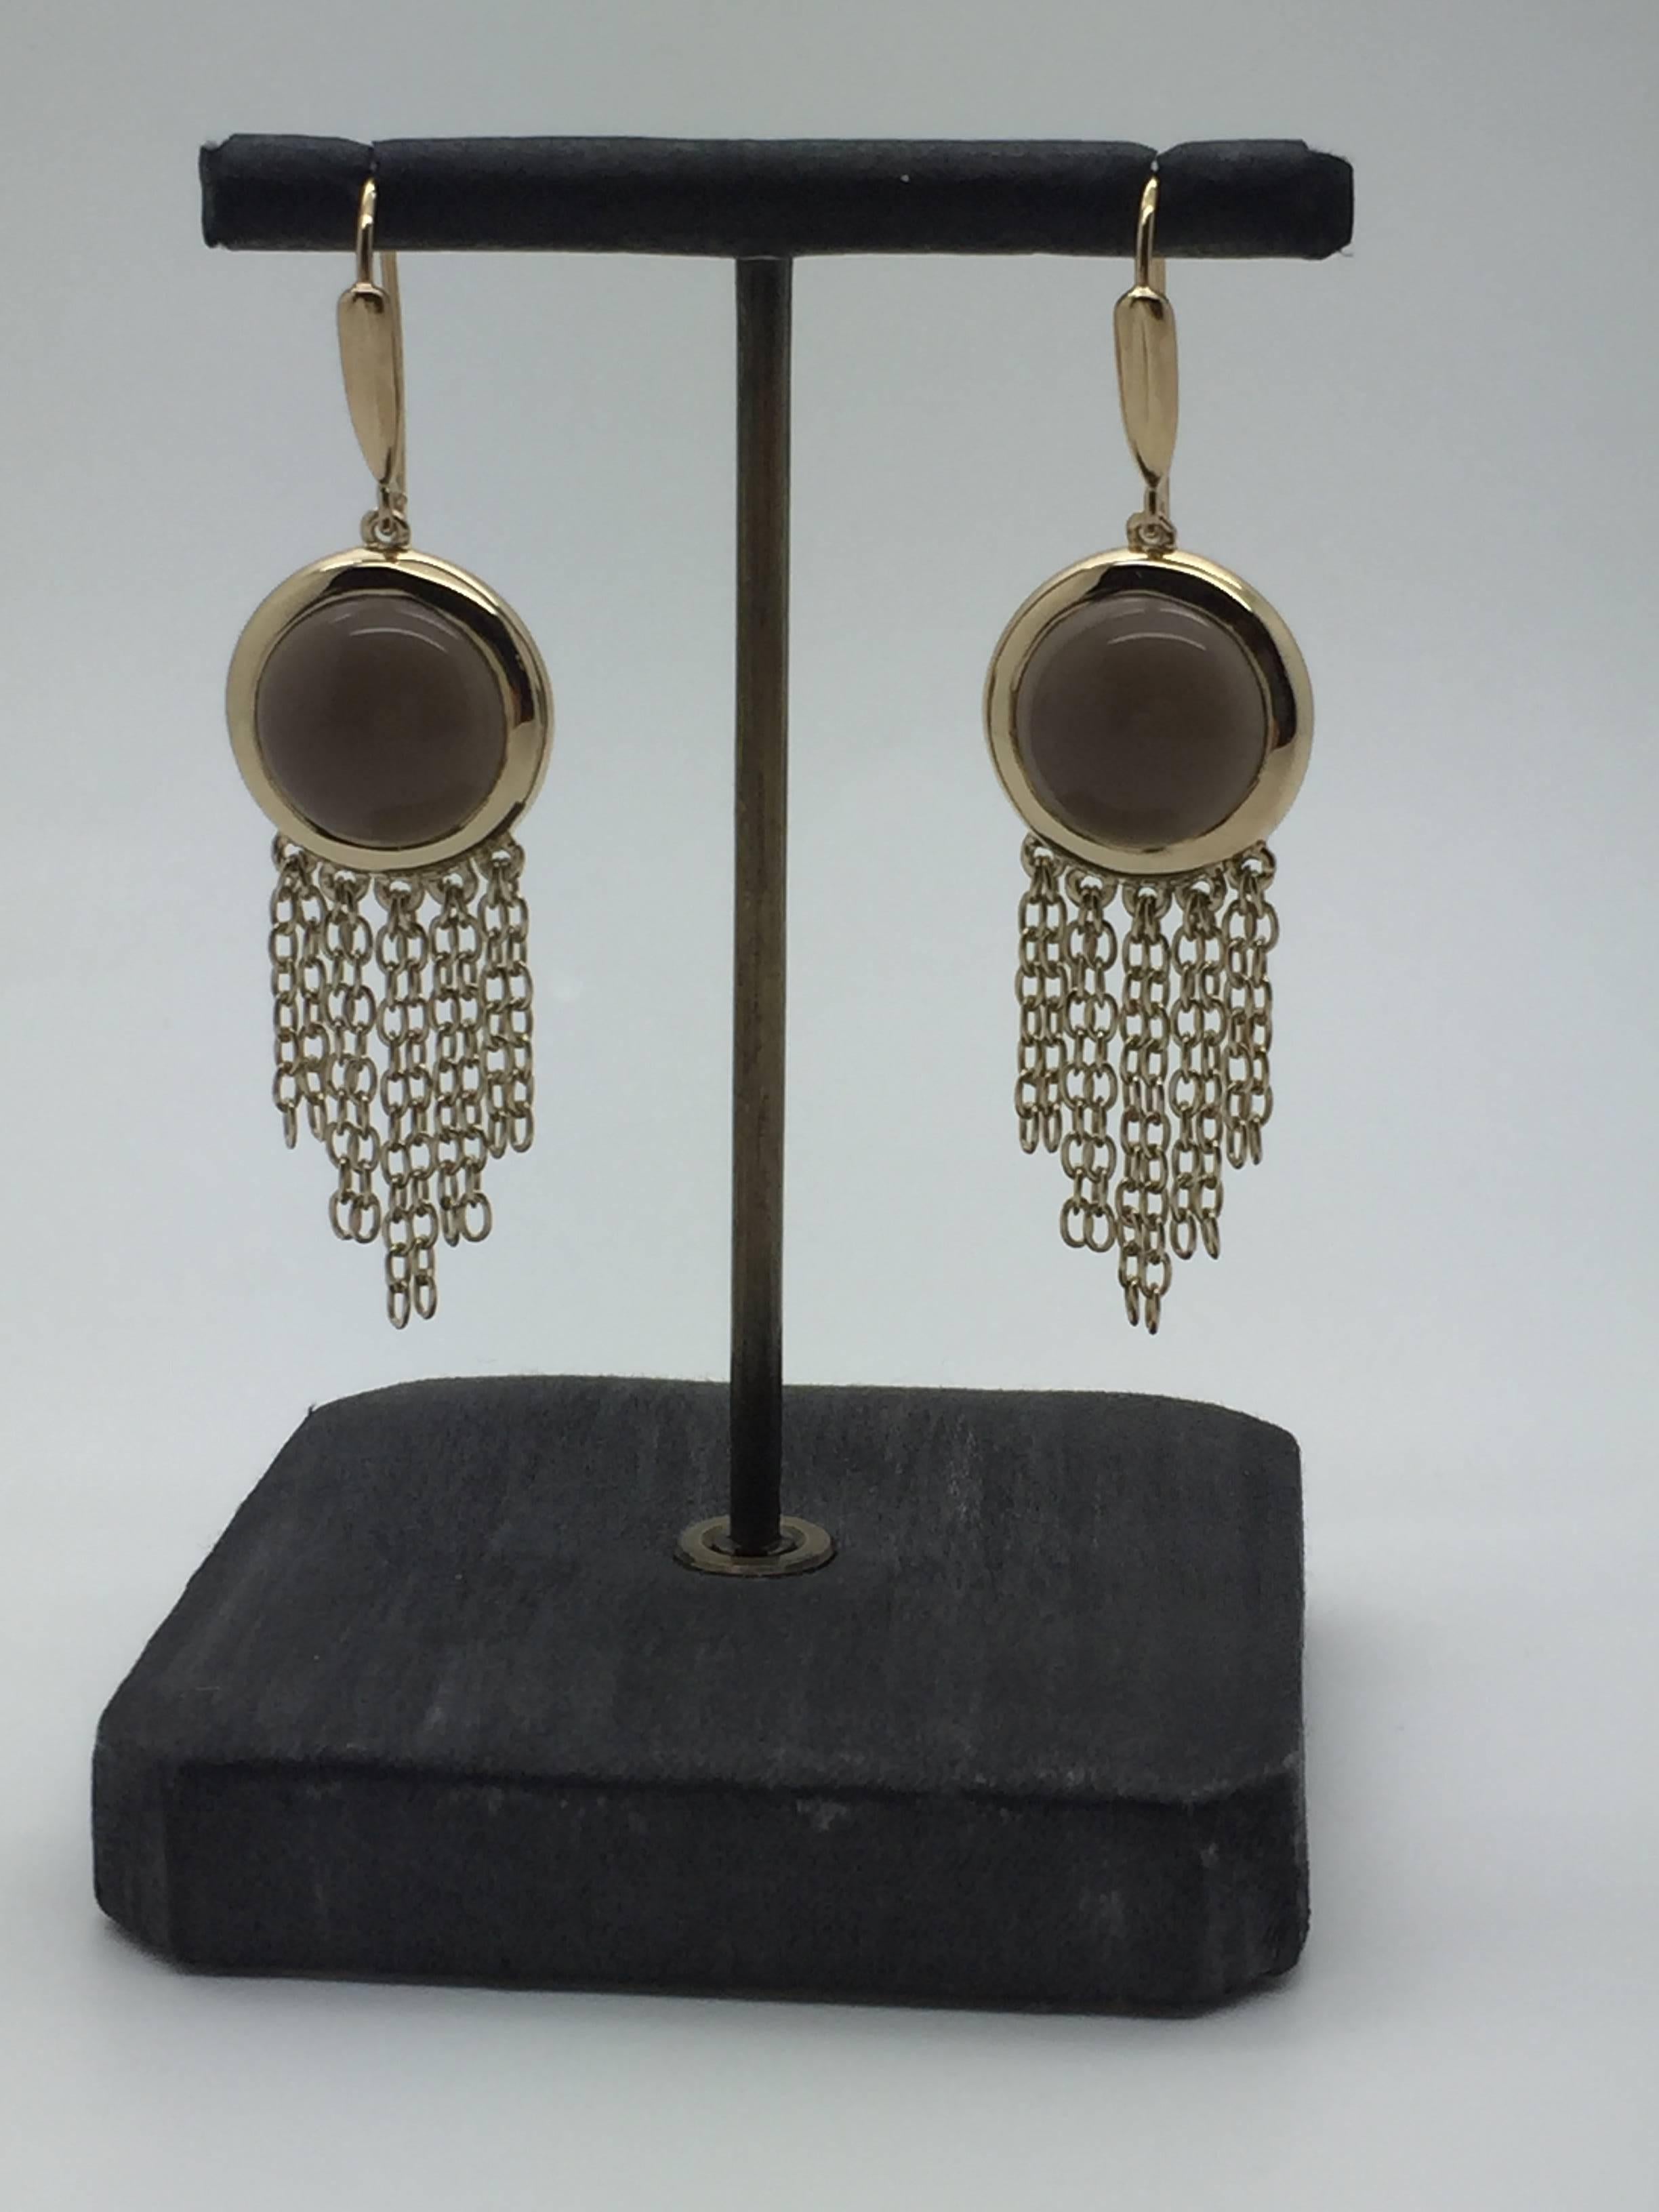 18kt Gold Vermeil (2.5 microns) on 925 Silver (Rhodium coated to enhance the colour of the metal)

These light and delicate chain earrings are perfect for day wear or special occasions.
They feature natural smoky quartz cabochons with hanging